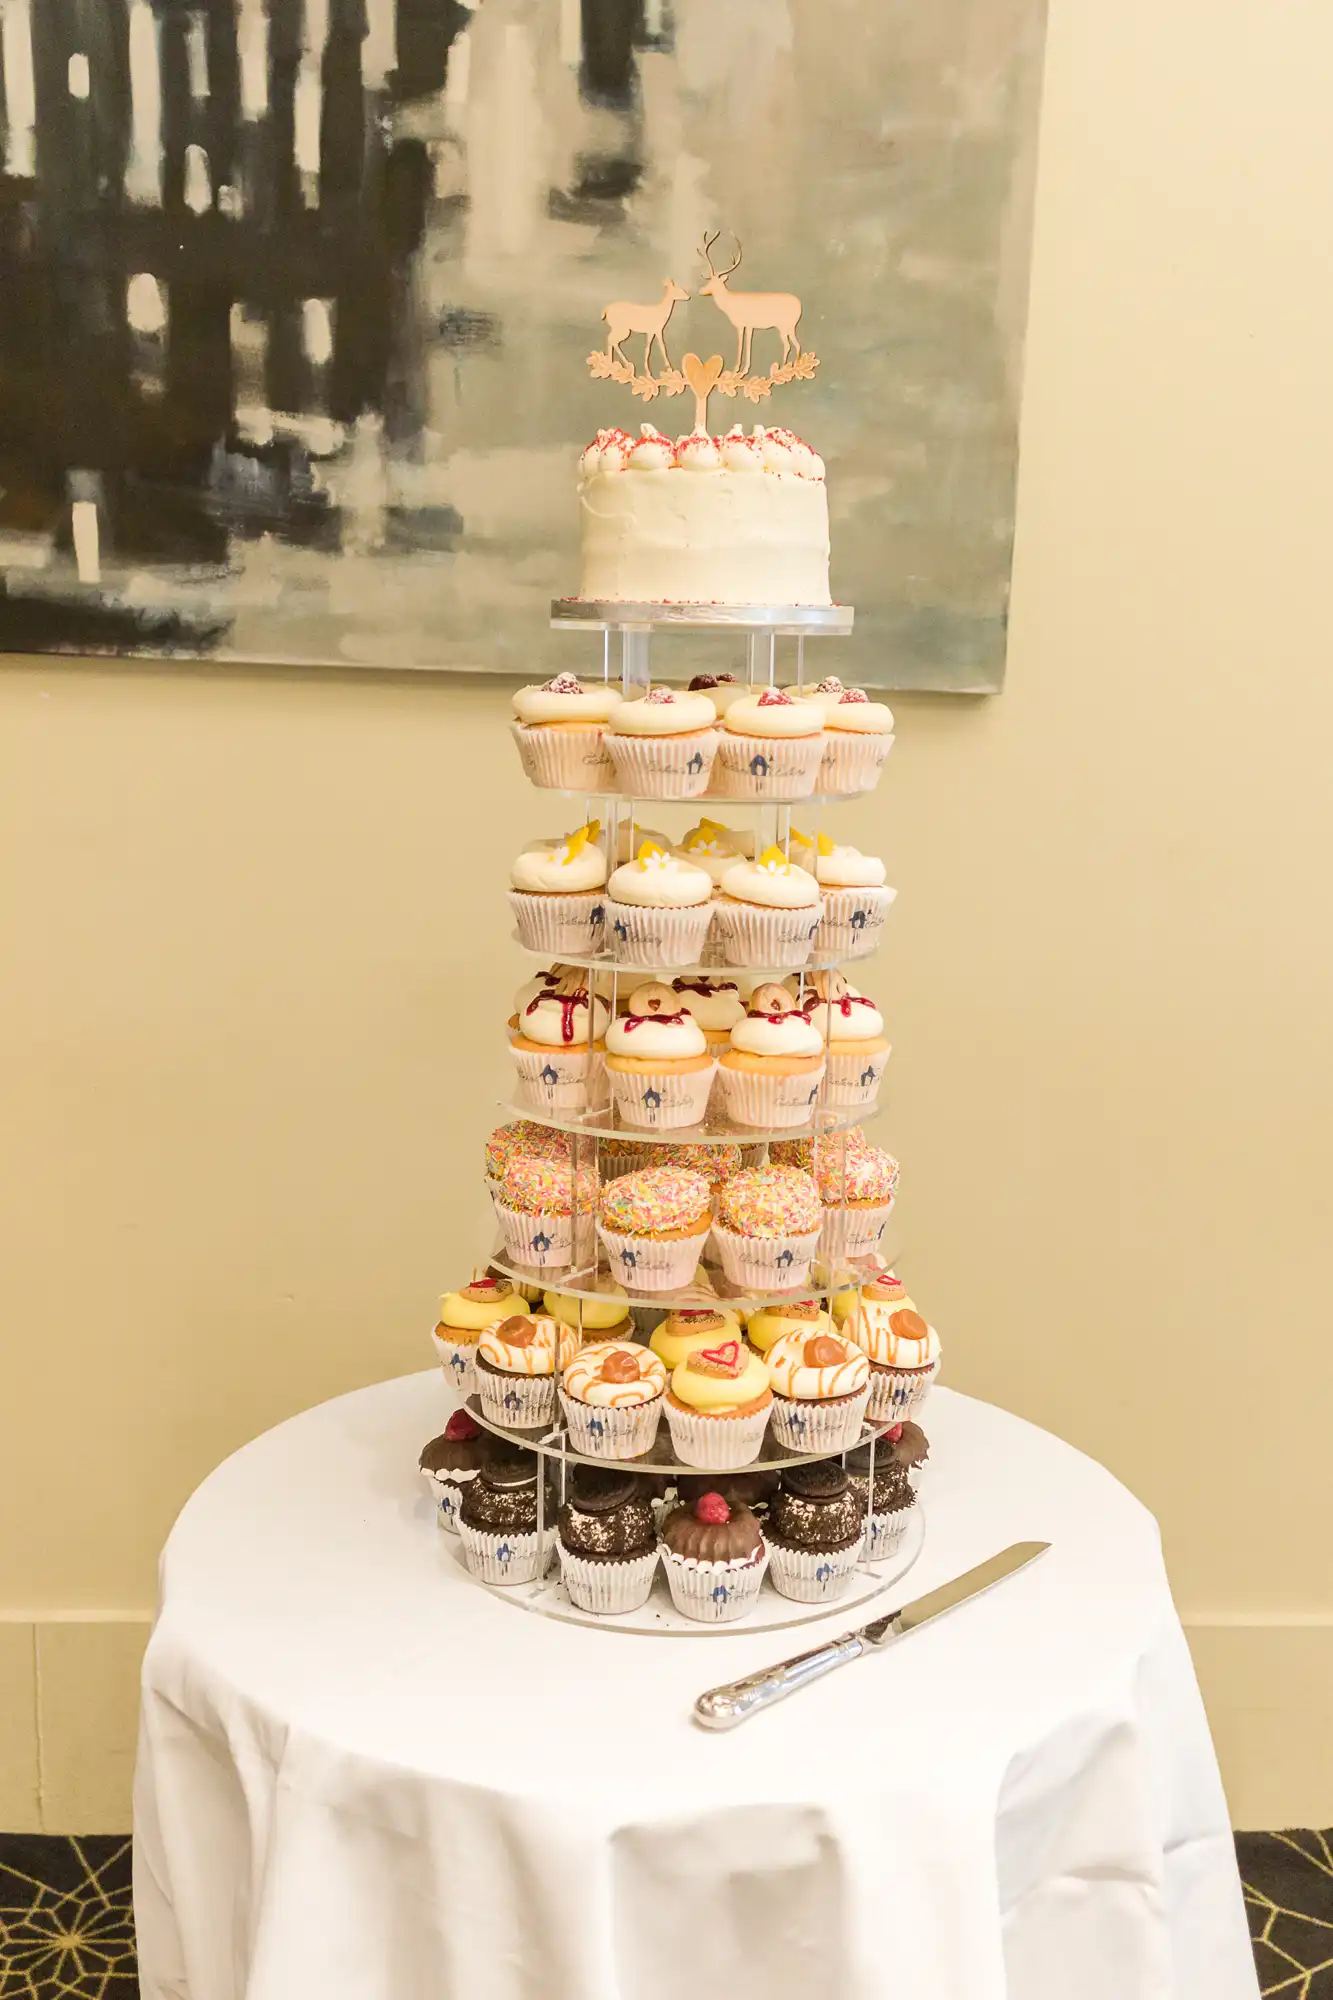 A tiered cupcake stand with various frosted cupcakes topped by a small wedding cake, displayed under an abstract painting in a warmly lit venue.